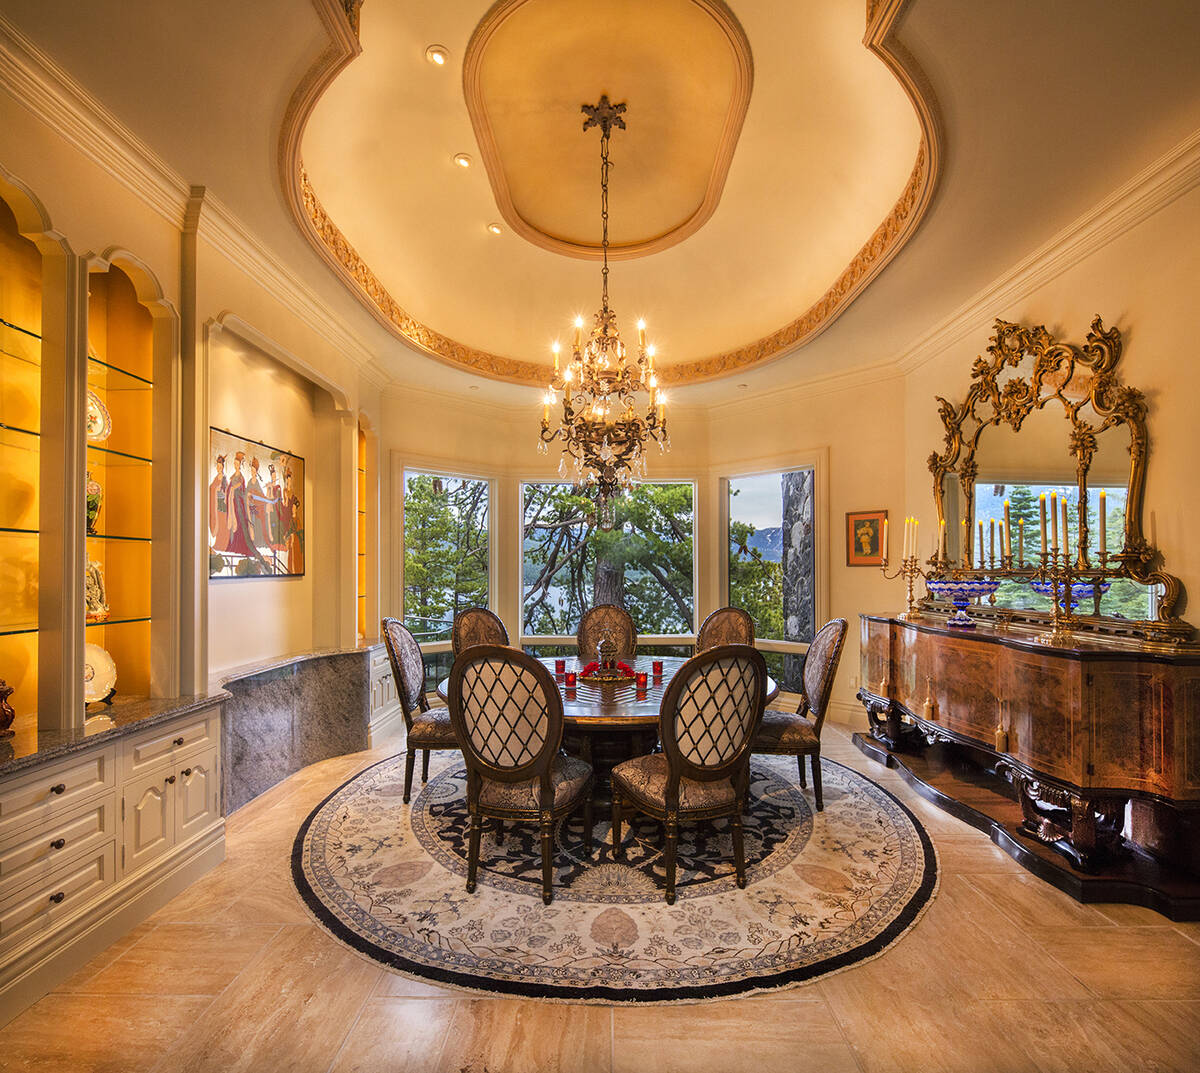 The formal dining room. (Chase International Realty)